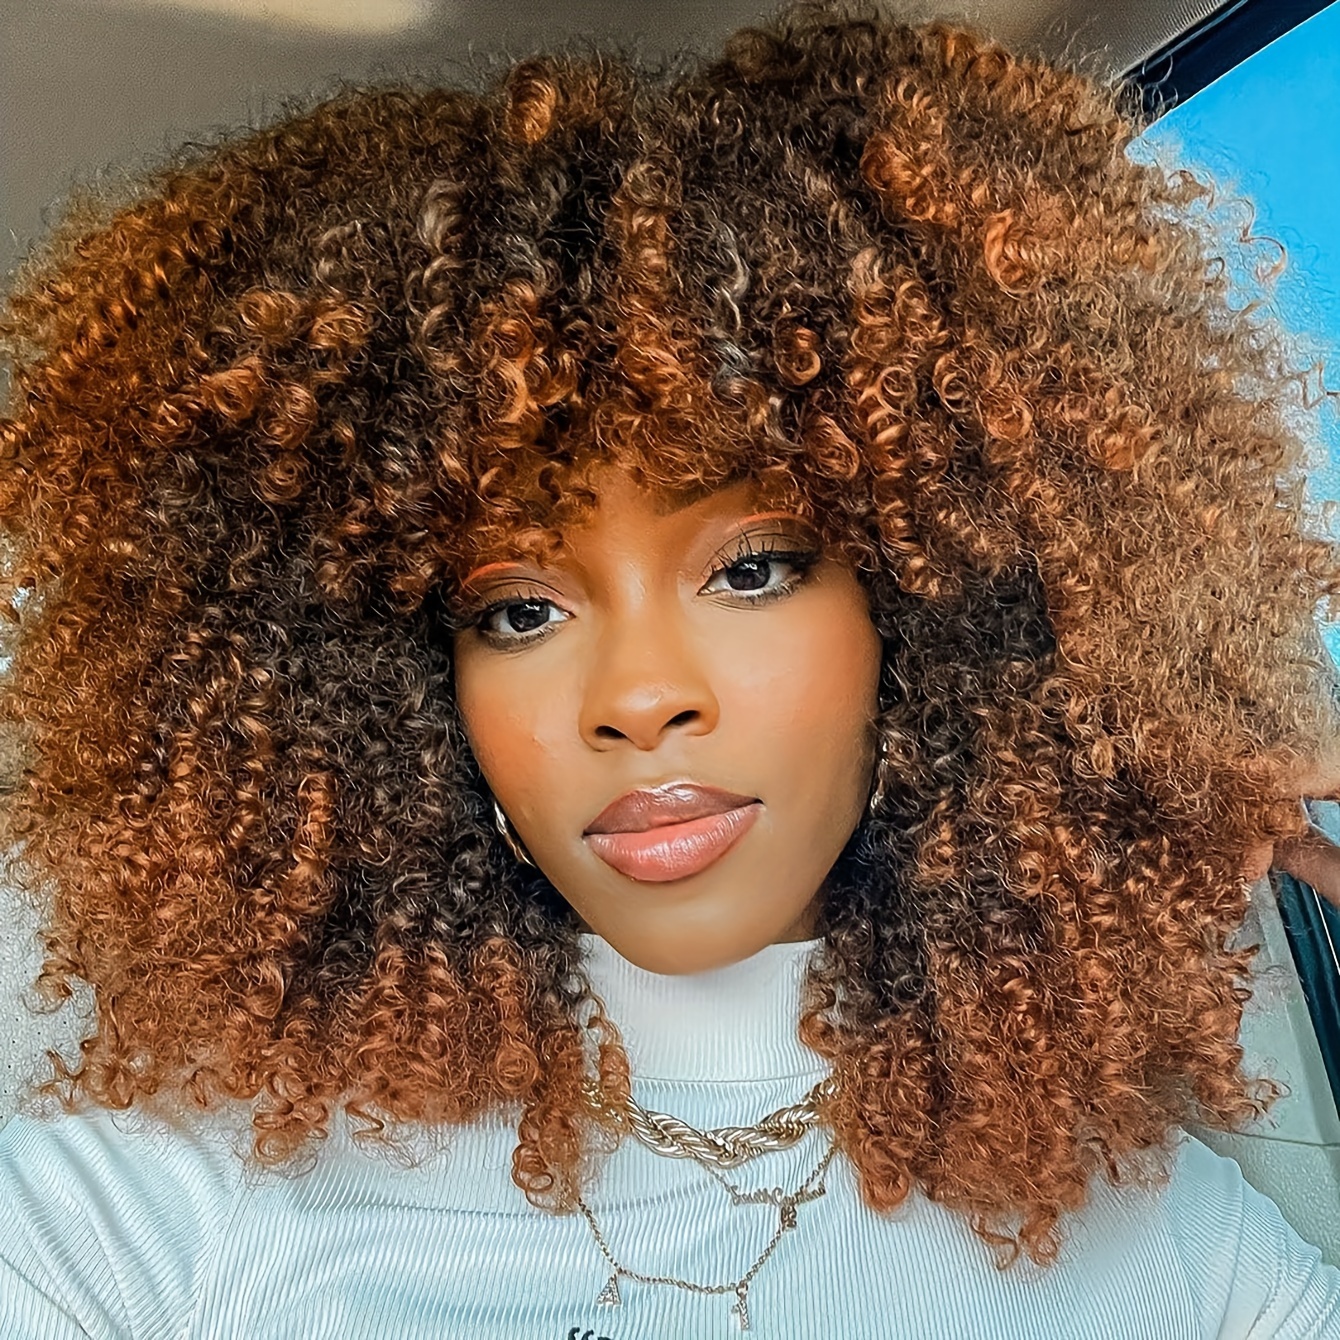 

Chic Ombre Brown Afro Wig With Bangs For Women - 14" Short Synthetic Hair, High-temperature Fiber, Perfect For Parties